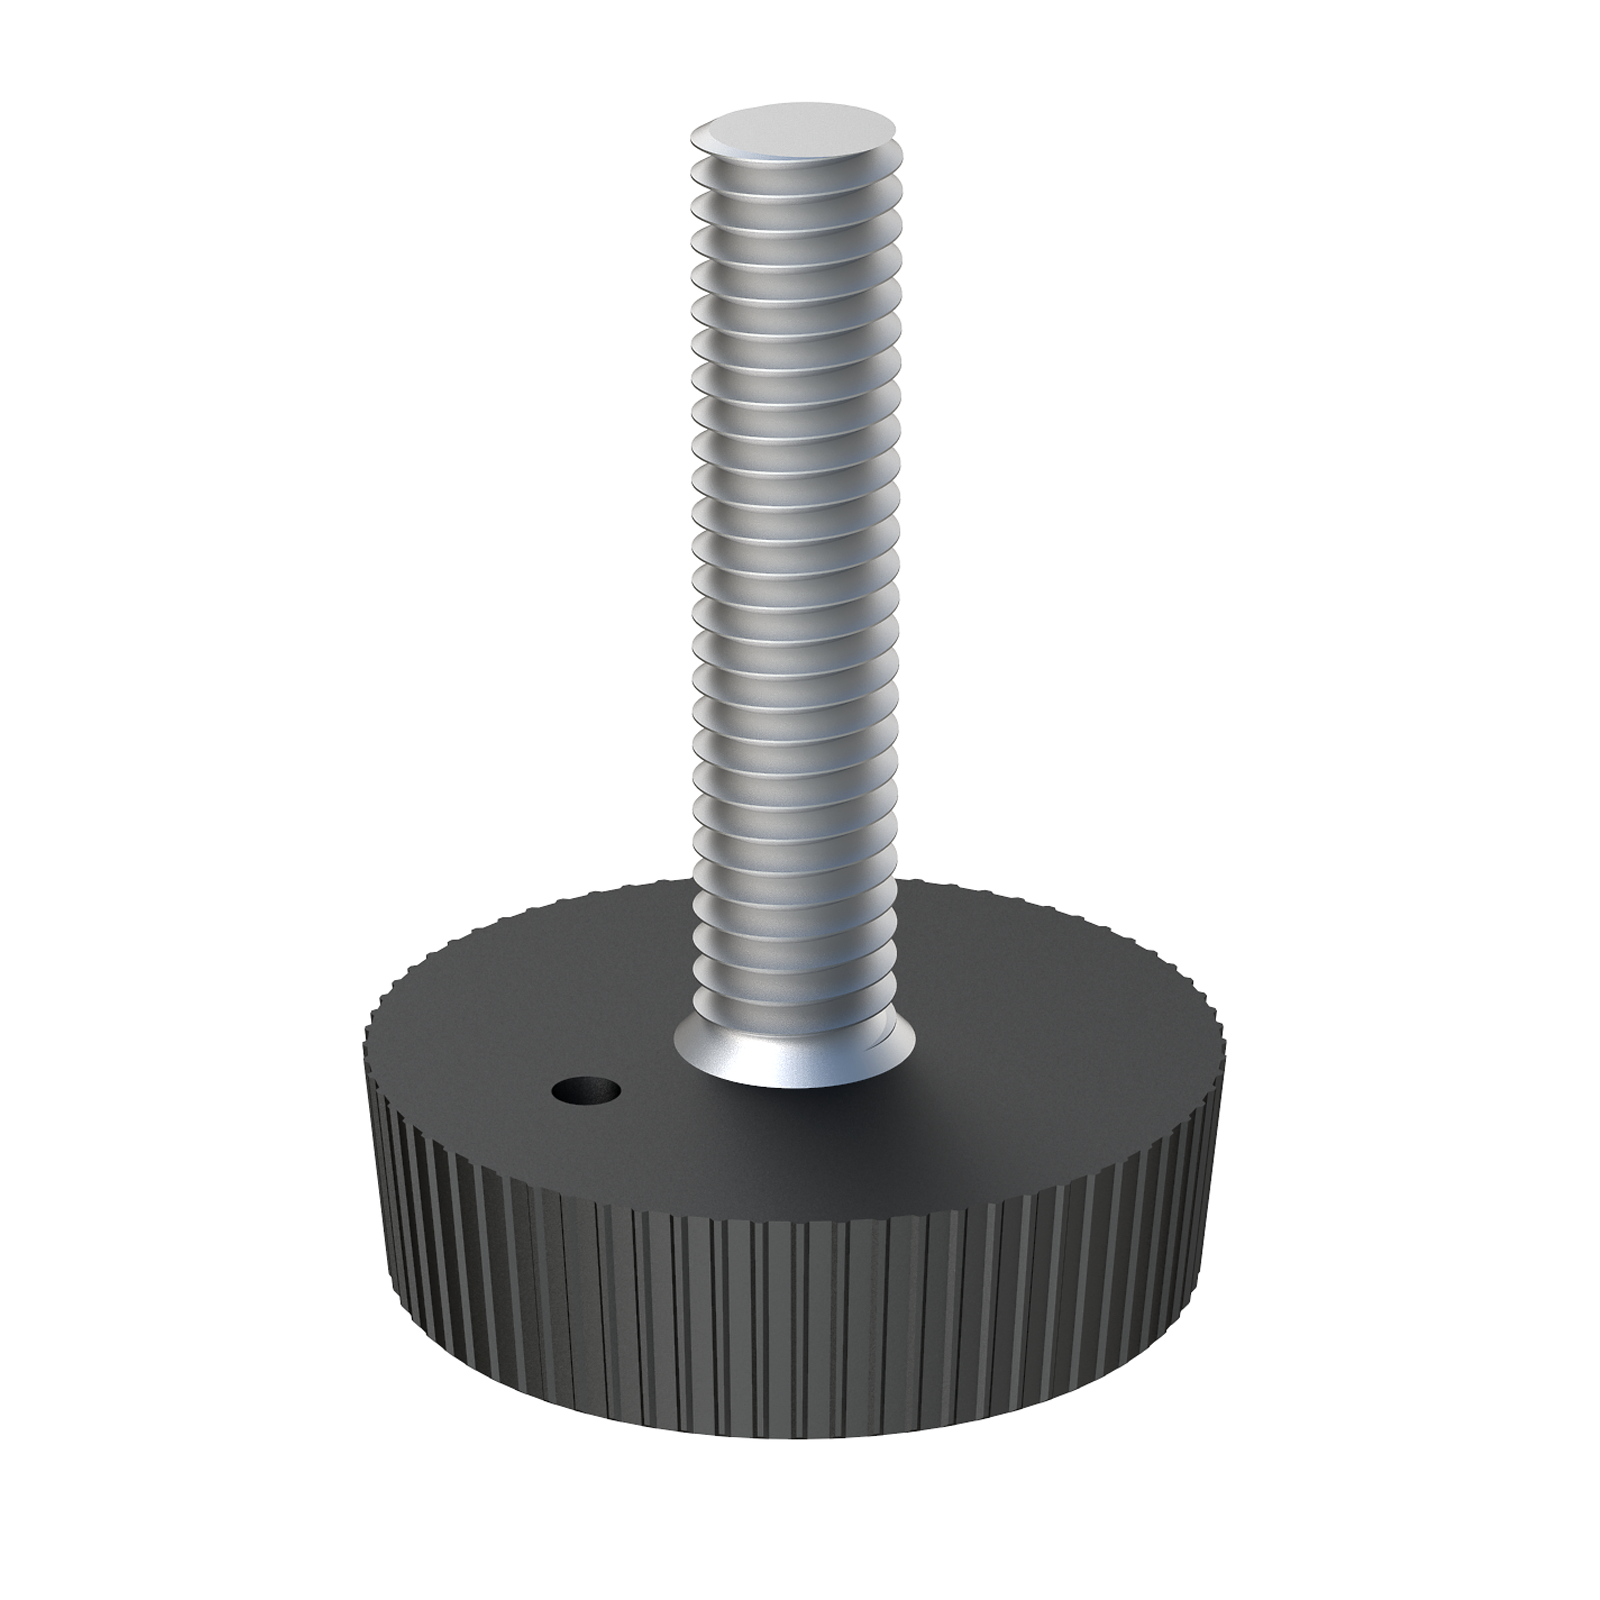 Our adjustable foot has a knurled base for easier handling.